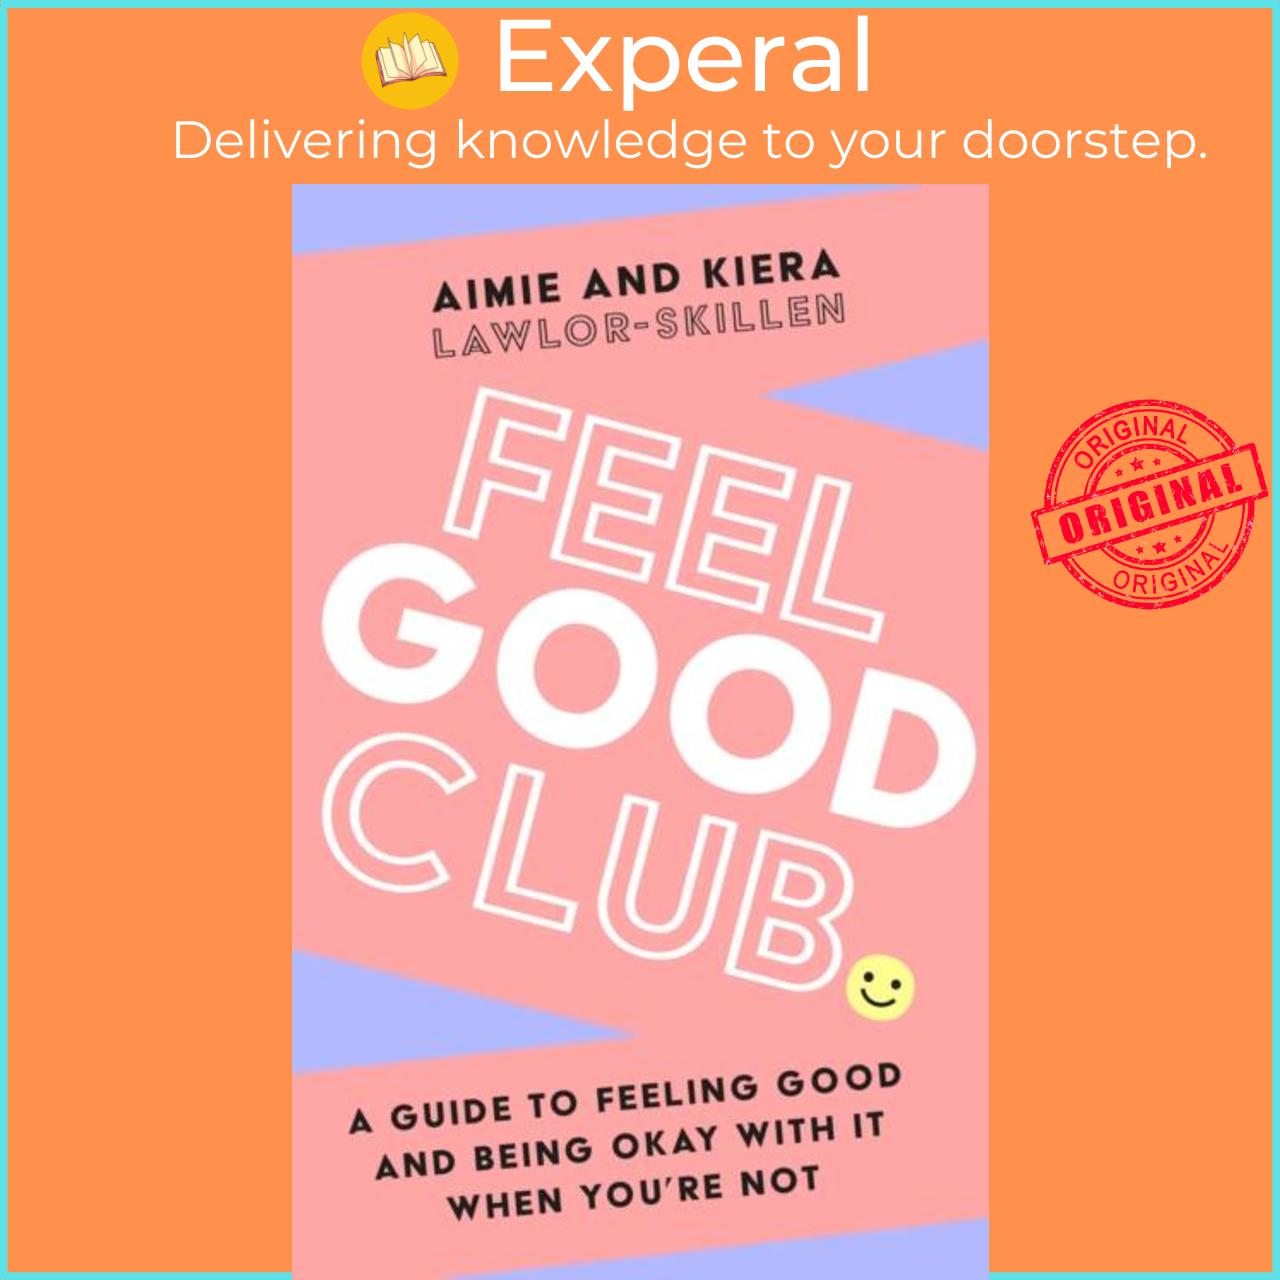 Sách - Feel Good Club - A Guide to Feeling Good and Being Okay with it W by Kiera Lawlor-Skillen (UK edition, paperback)